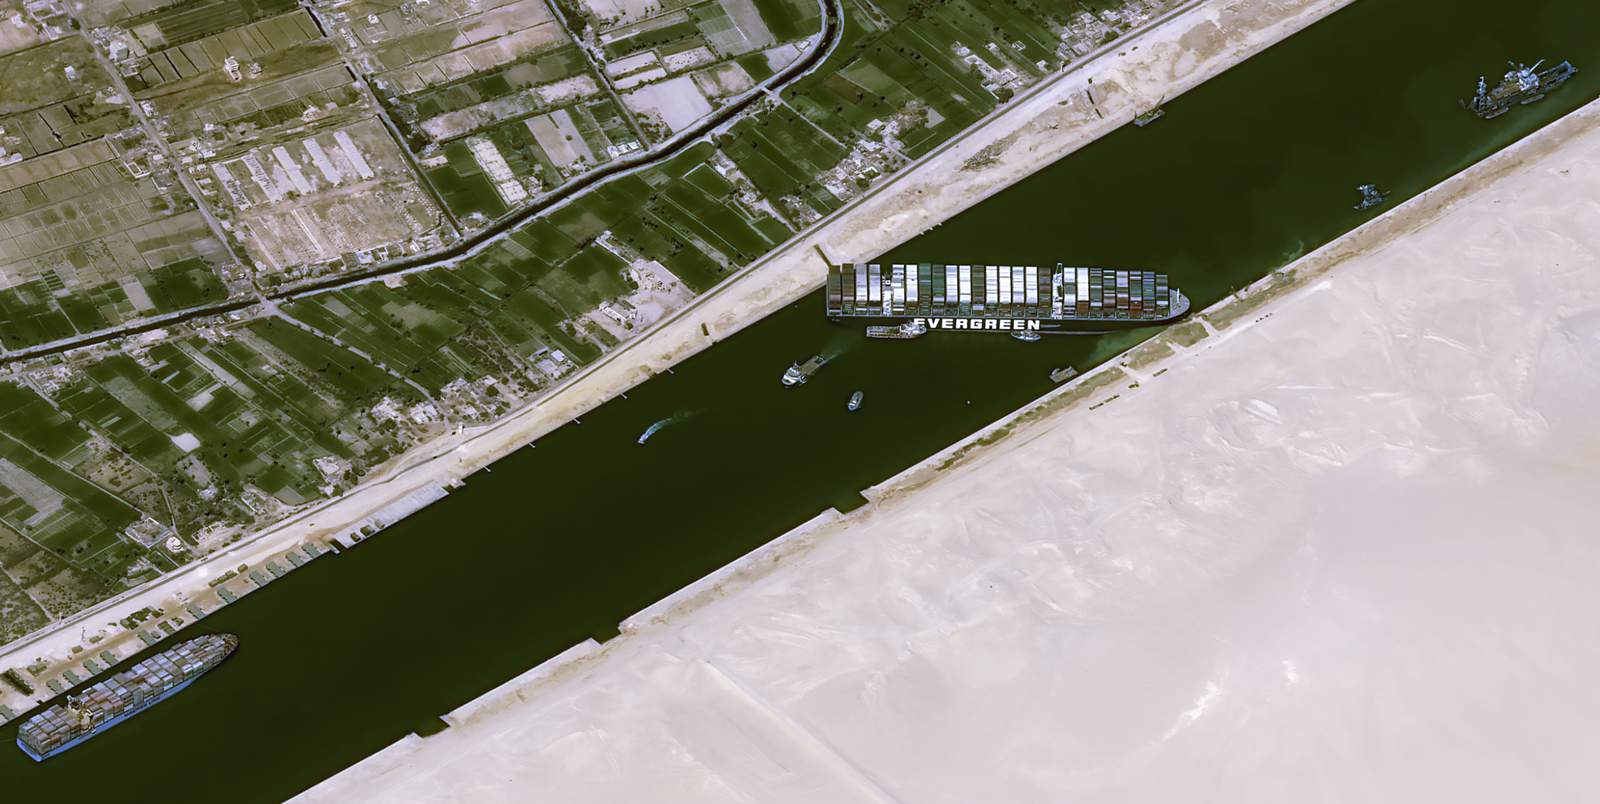 EXPLAINER: Suez Canal block could hit product supply chains